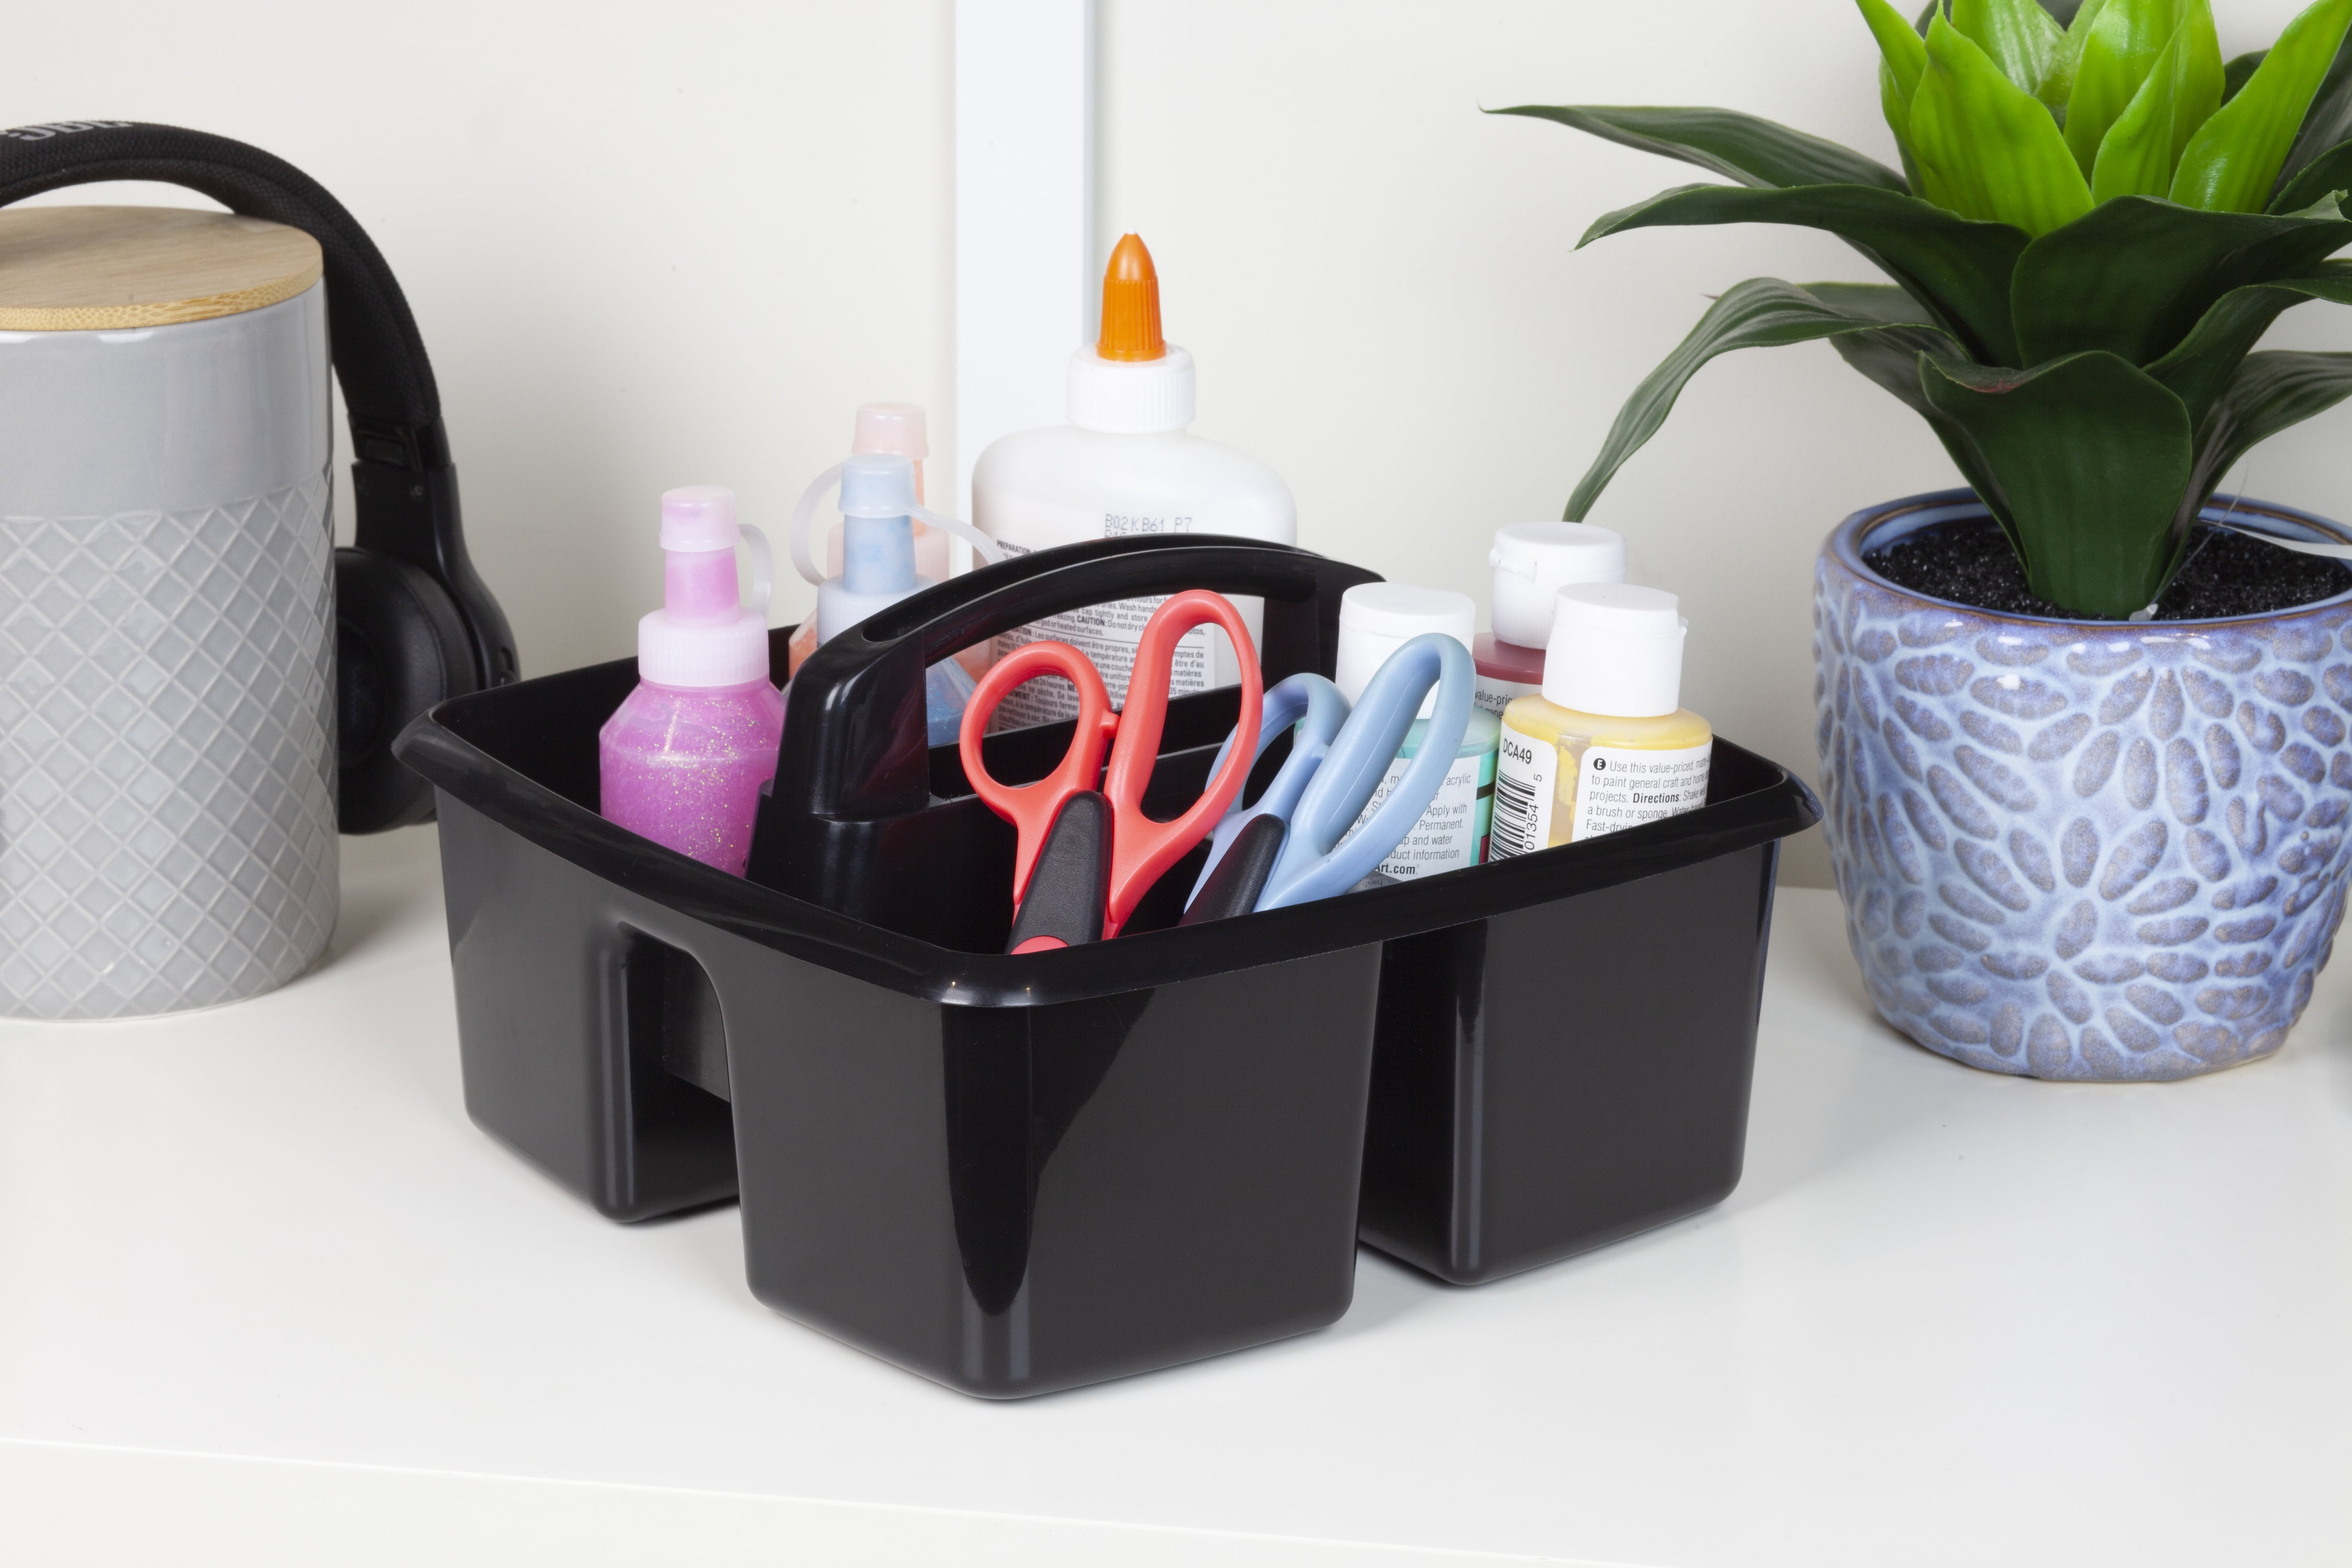 Pen+Gear Plastic Caddy, Craft and Hobby Organizer, Clear Tint